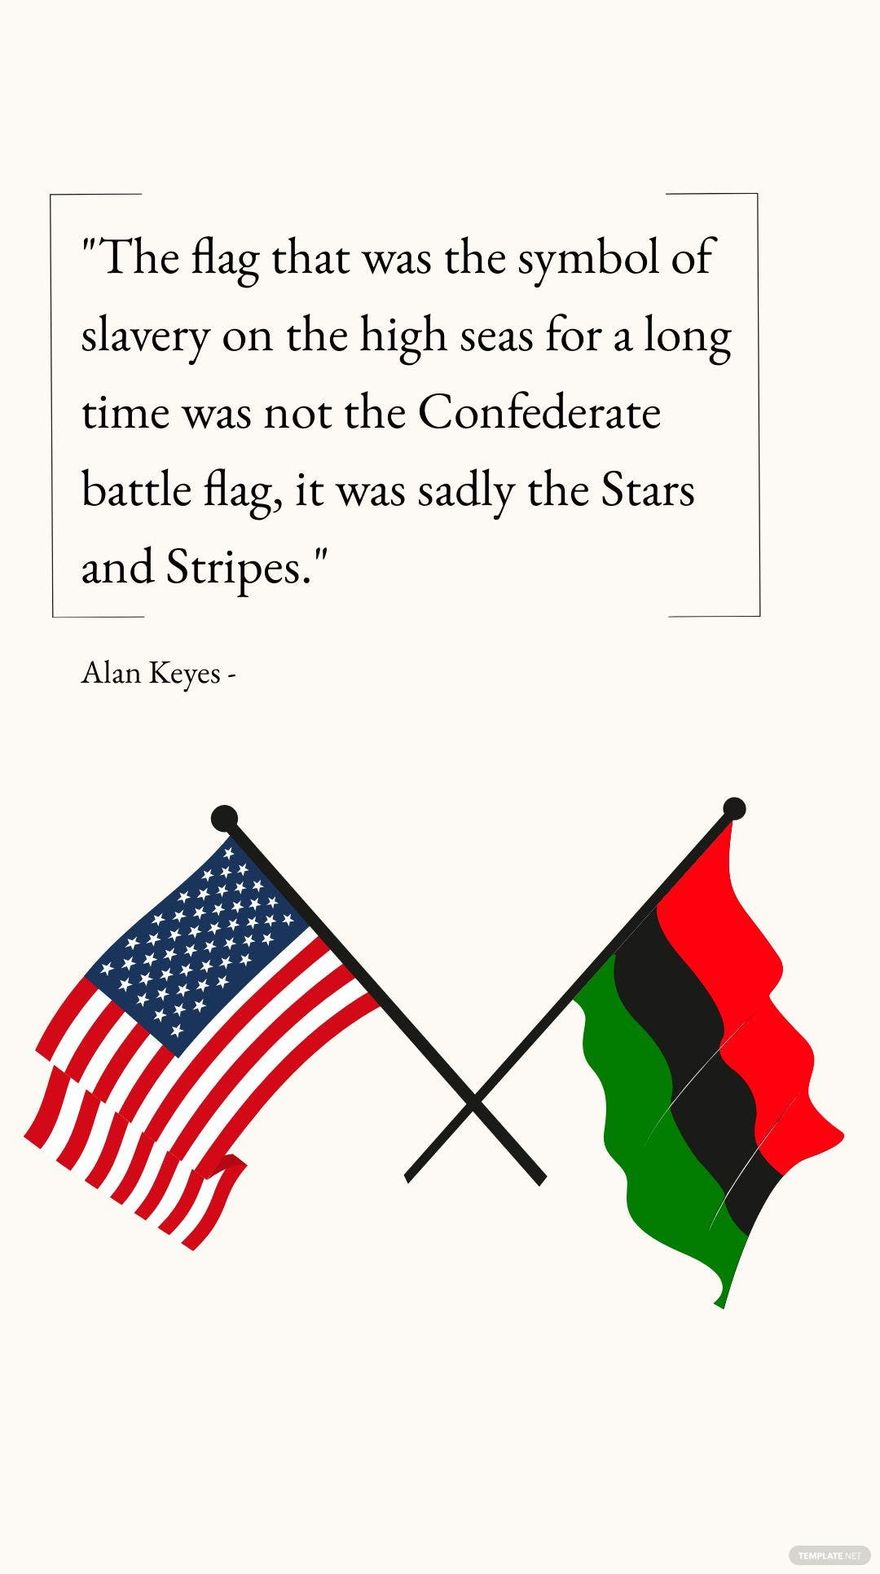 Alan Keyes - The flag that was the symbol of slavery on the high seas for a long time was not the Confederate battle flag, it was sadly the Stars and Stripes. in JPG